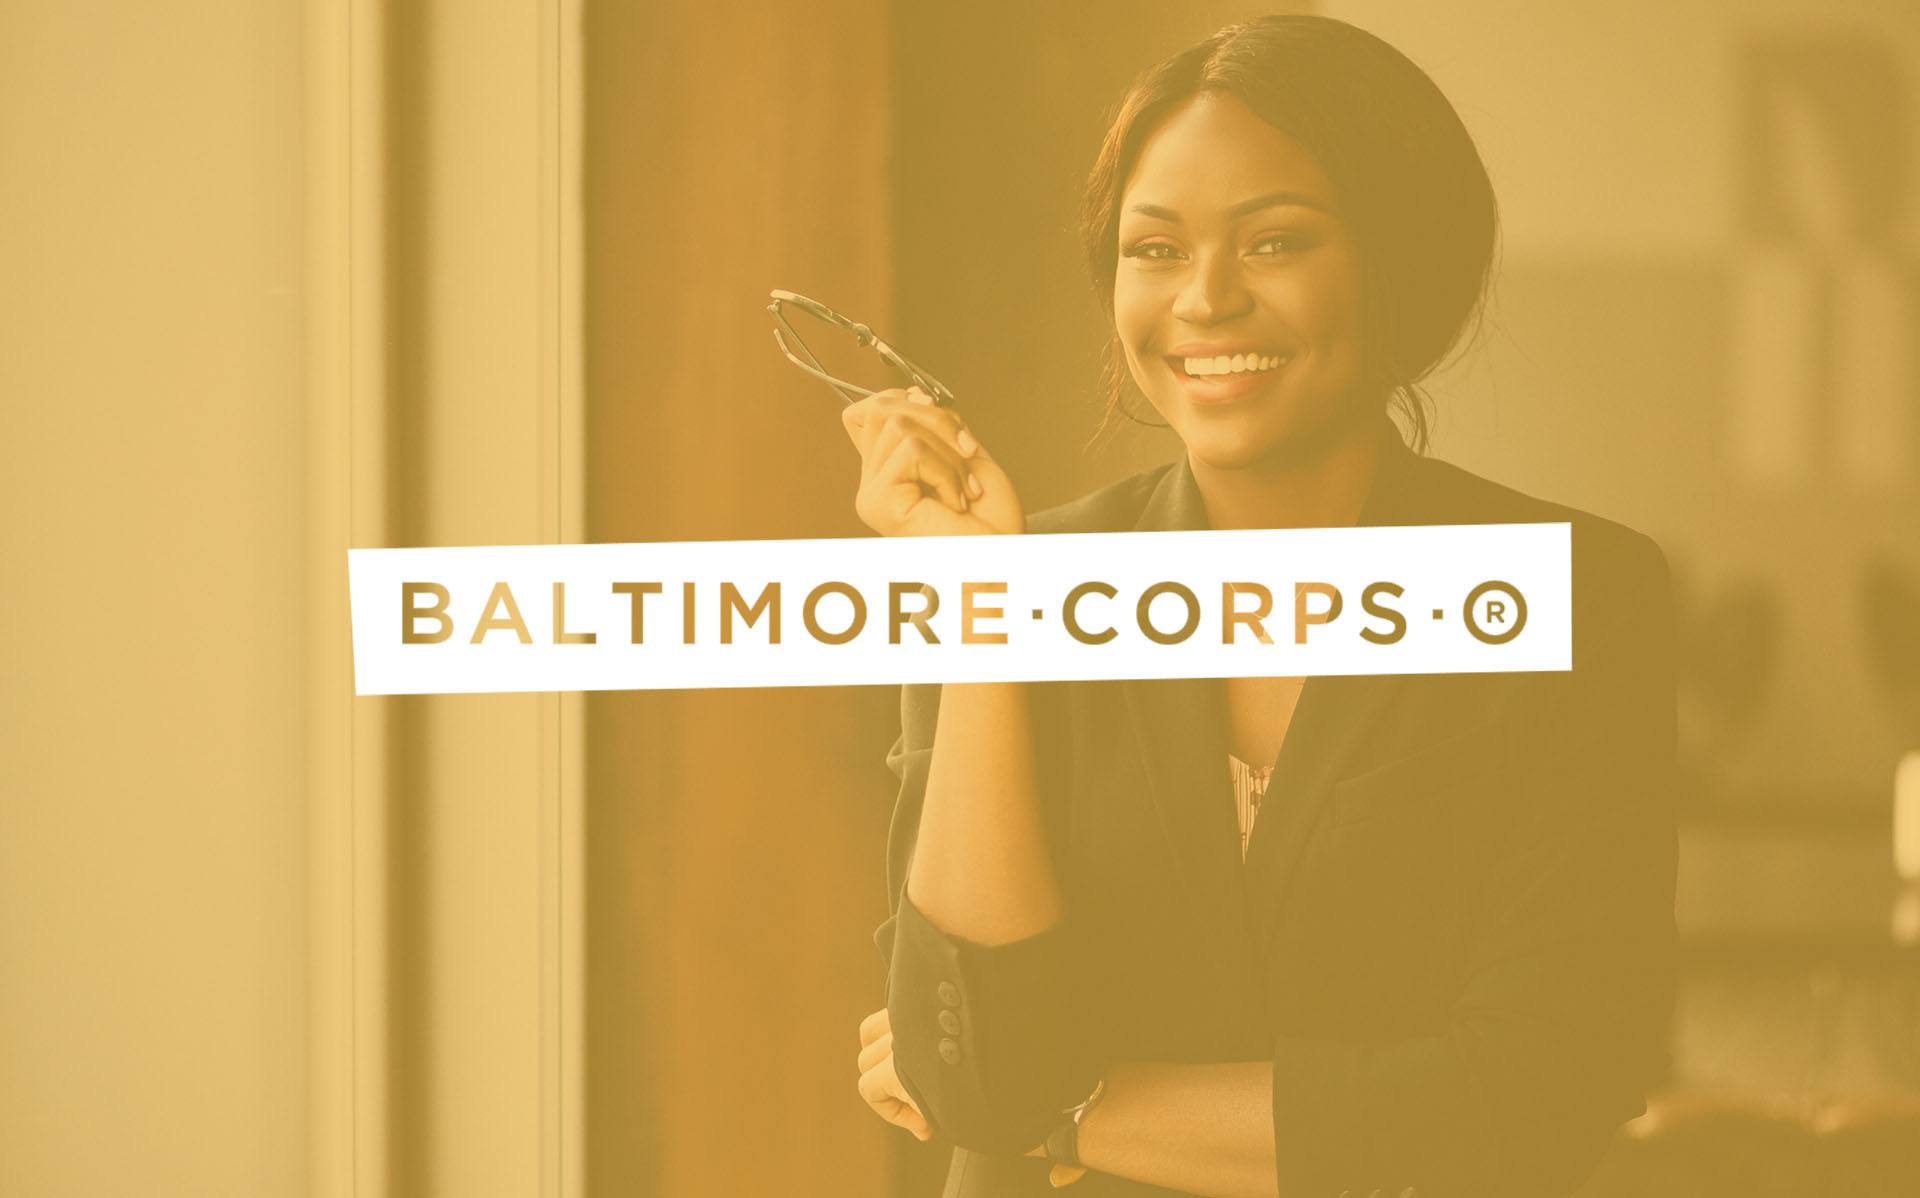 fellowship applications and skils development training at baltimore corps